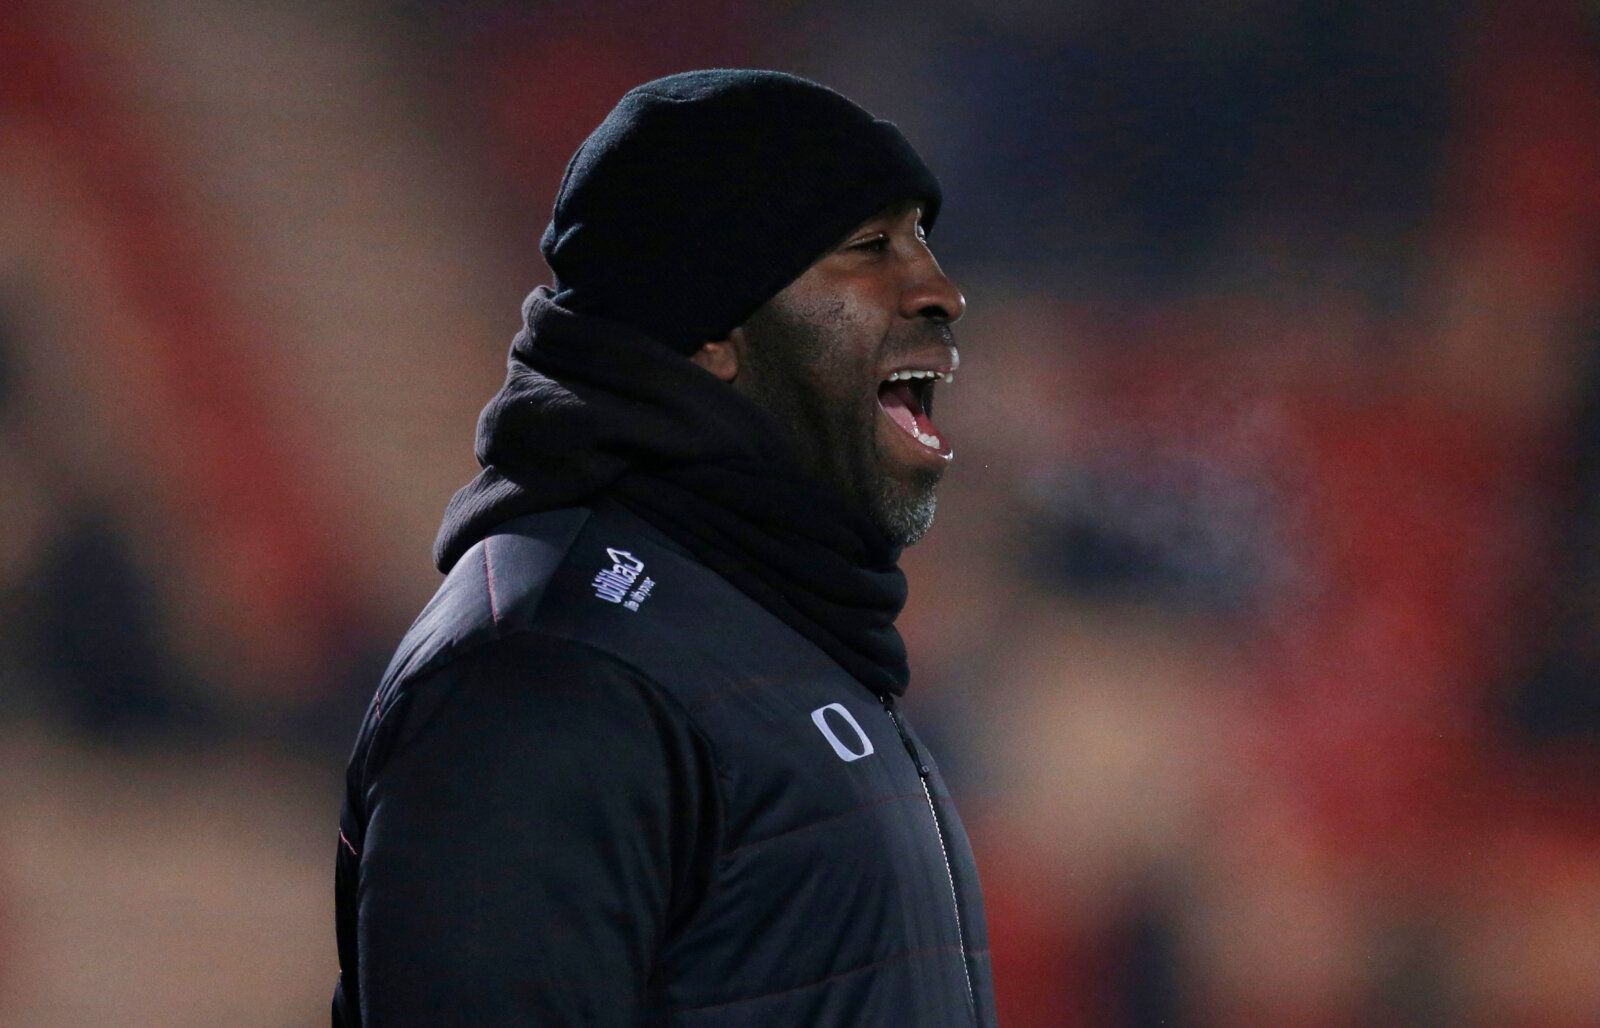 Soccer Football - FA Cup First Round Replay - Doncaster Rovers v AFC Wimbledon - Keepmoat Stadium, Doncaster, Britain - November 19, 2019  Doncaster Rovers manager Darren Moore   Action Images/Ed Sykes